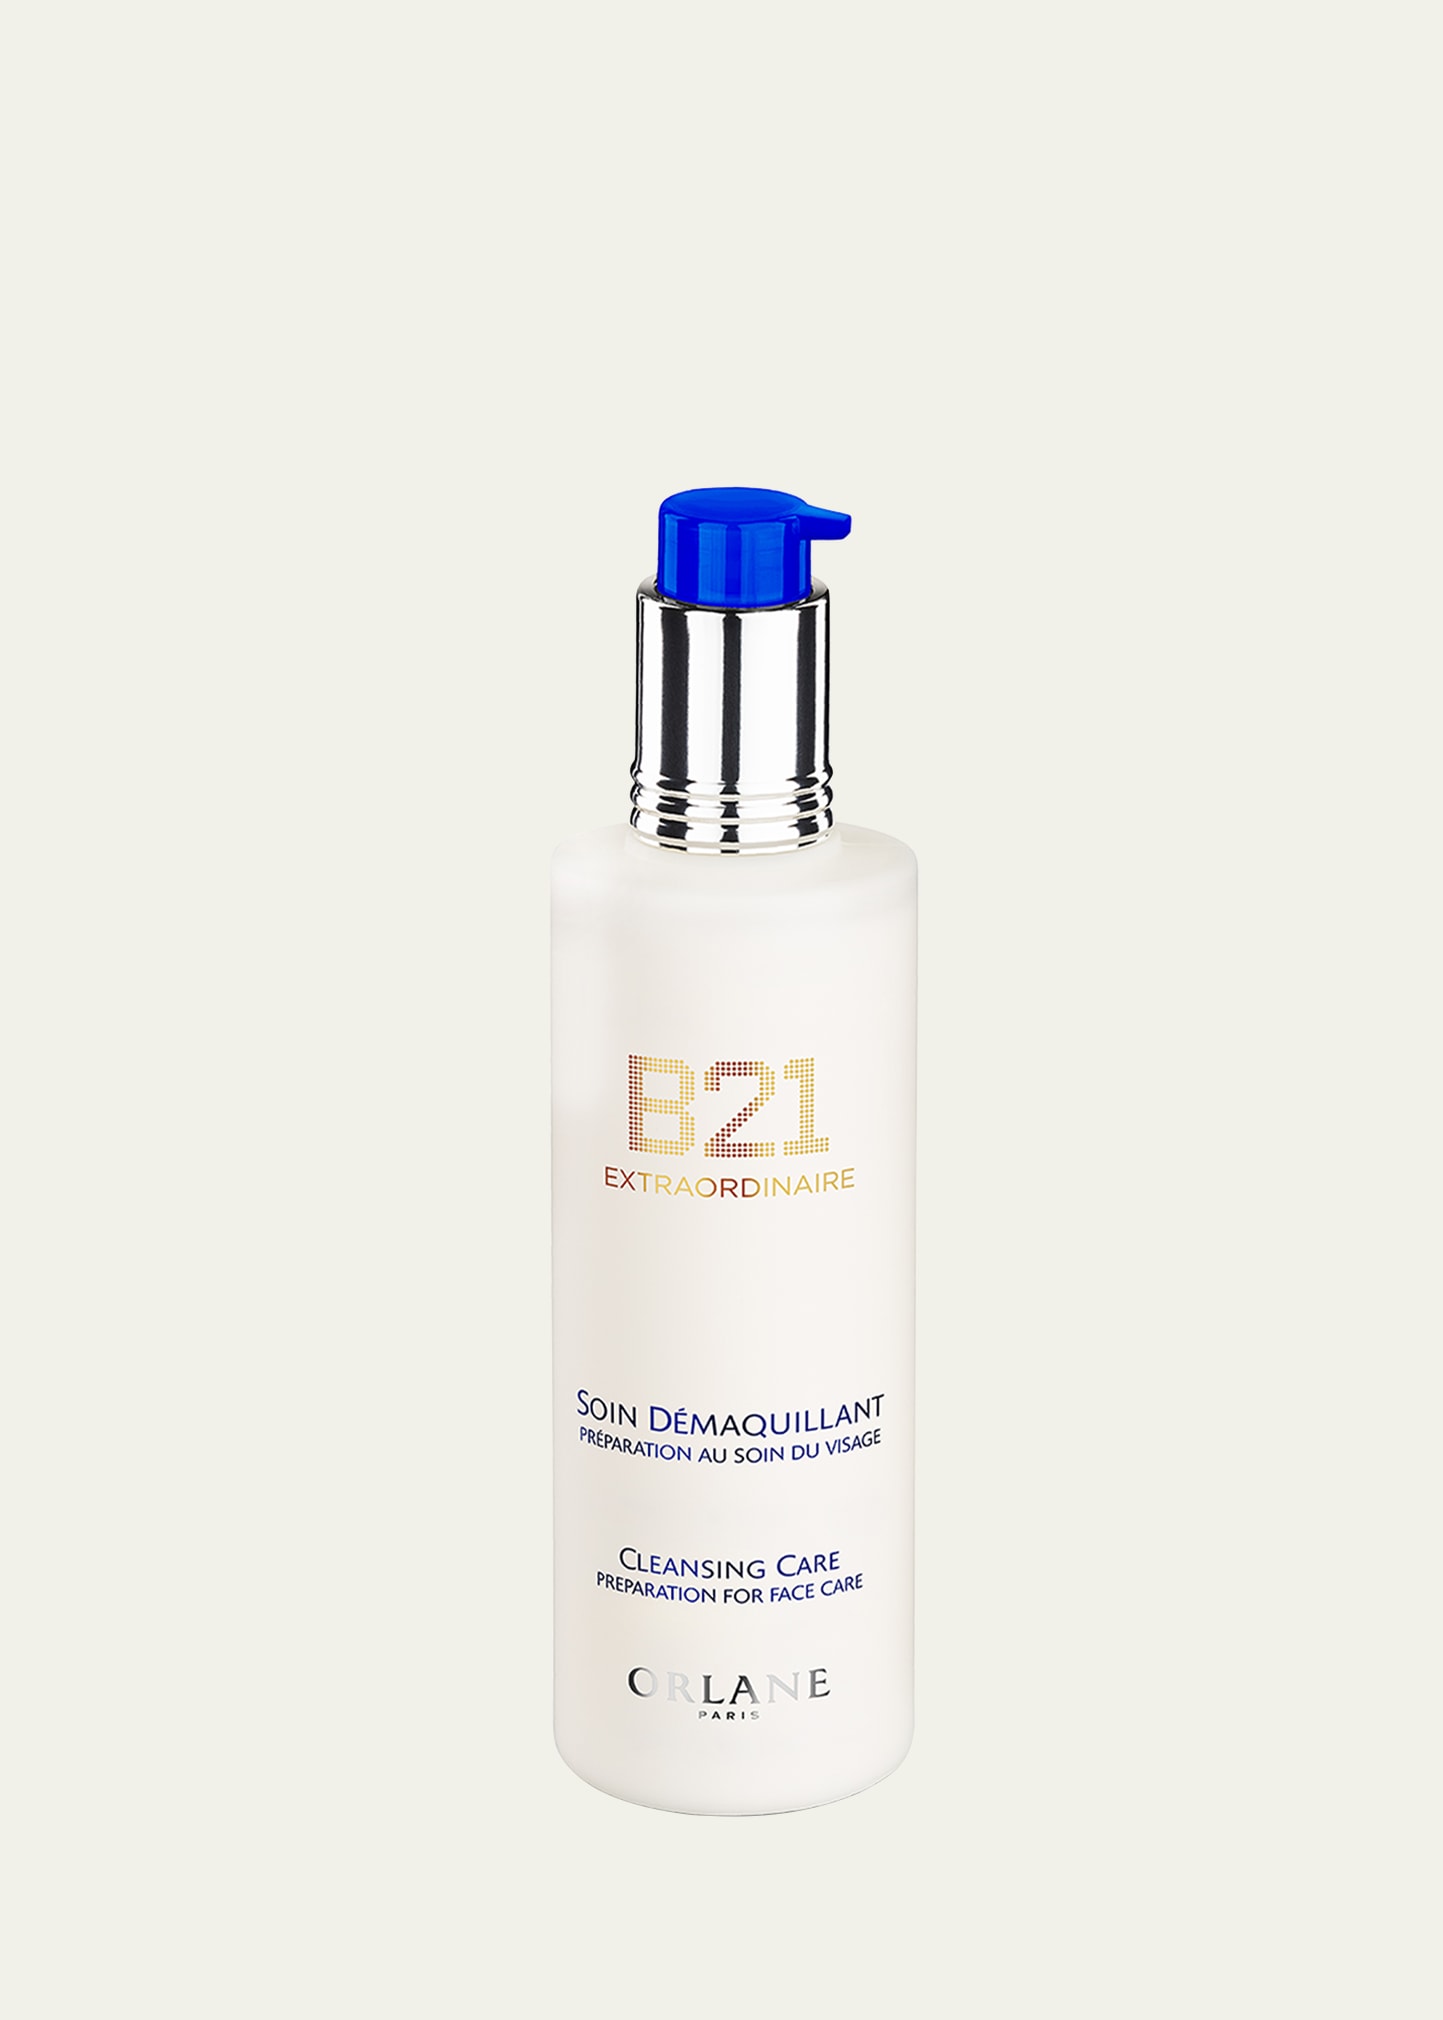 B21 Extraordinaire Cleansing Care, 8.5 oz.